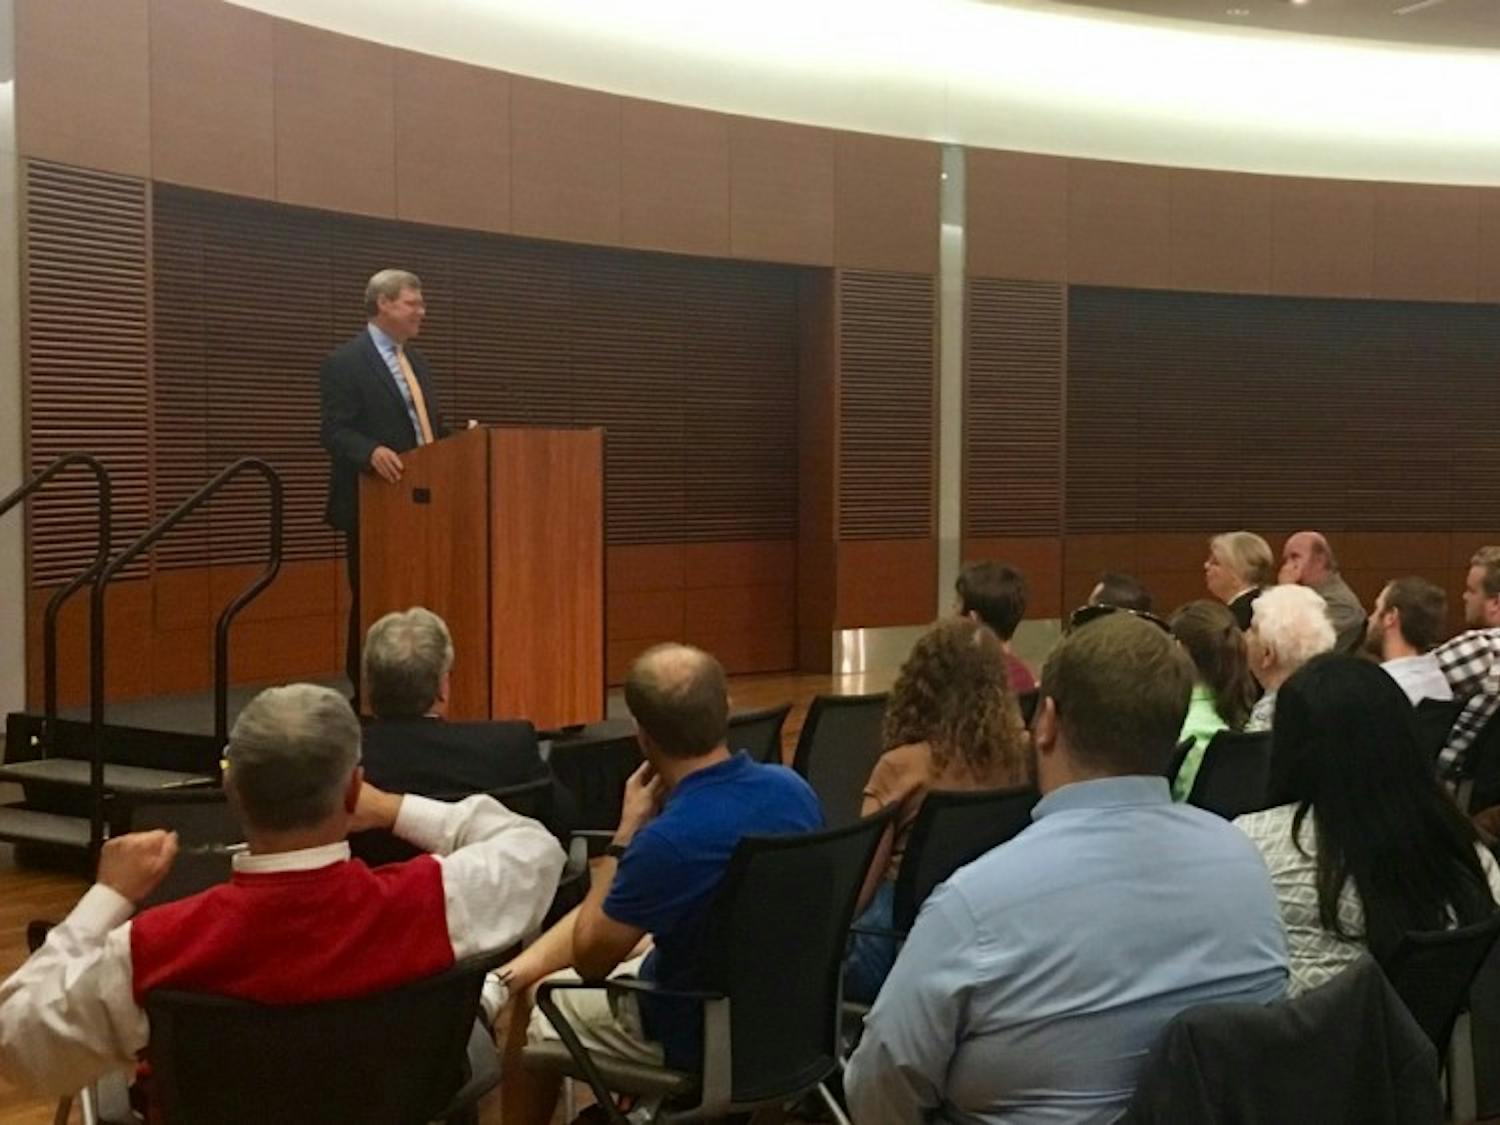 Charlie Sykes, who for decades was a popular right-wing radio host, spoke to students and community members at the Discovery Building Monday.